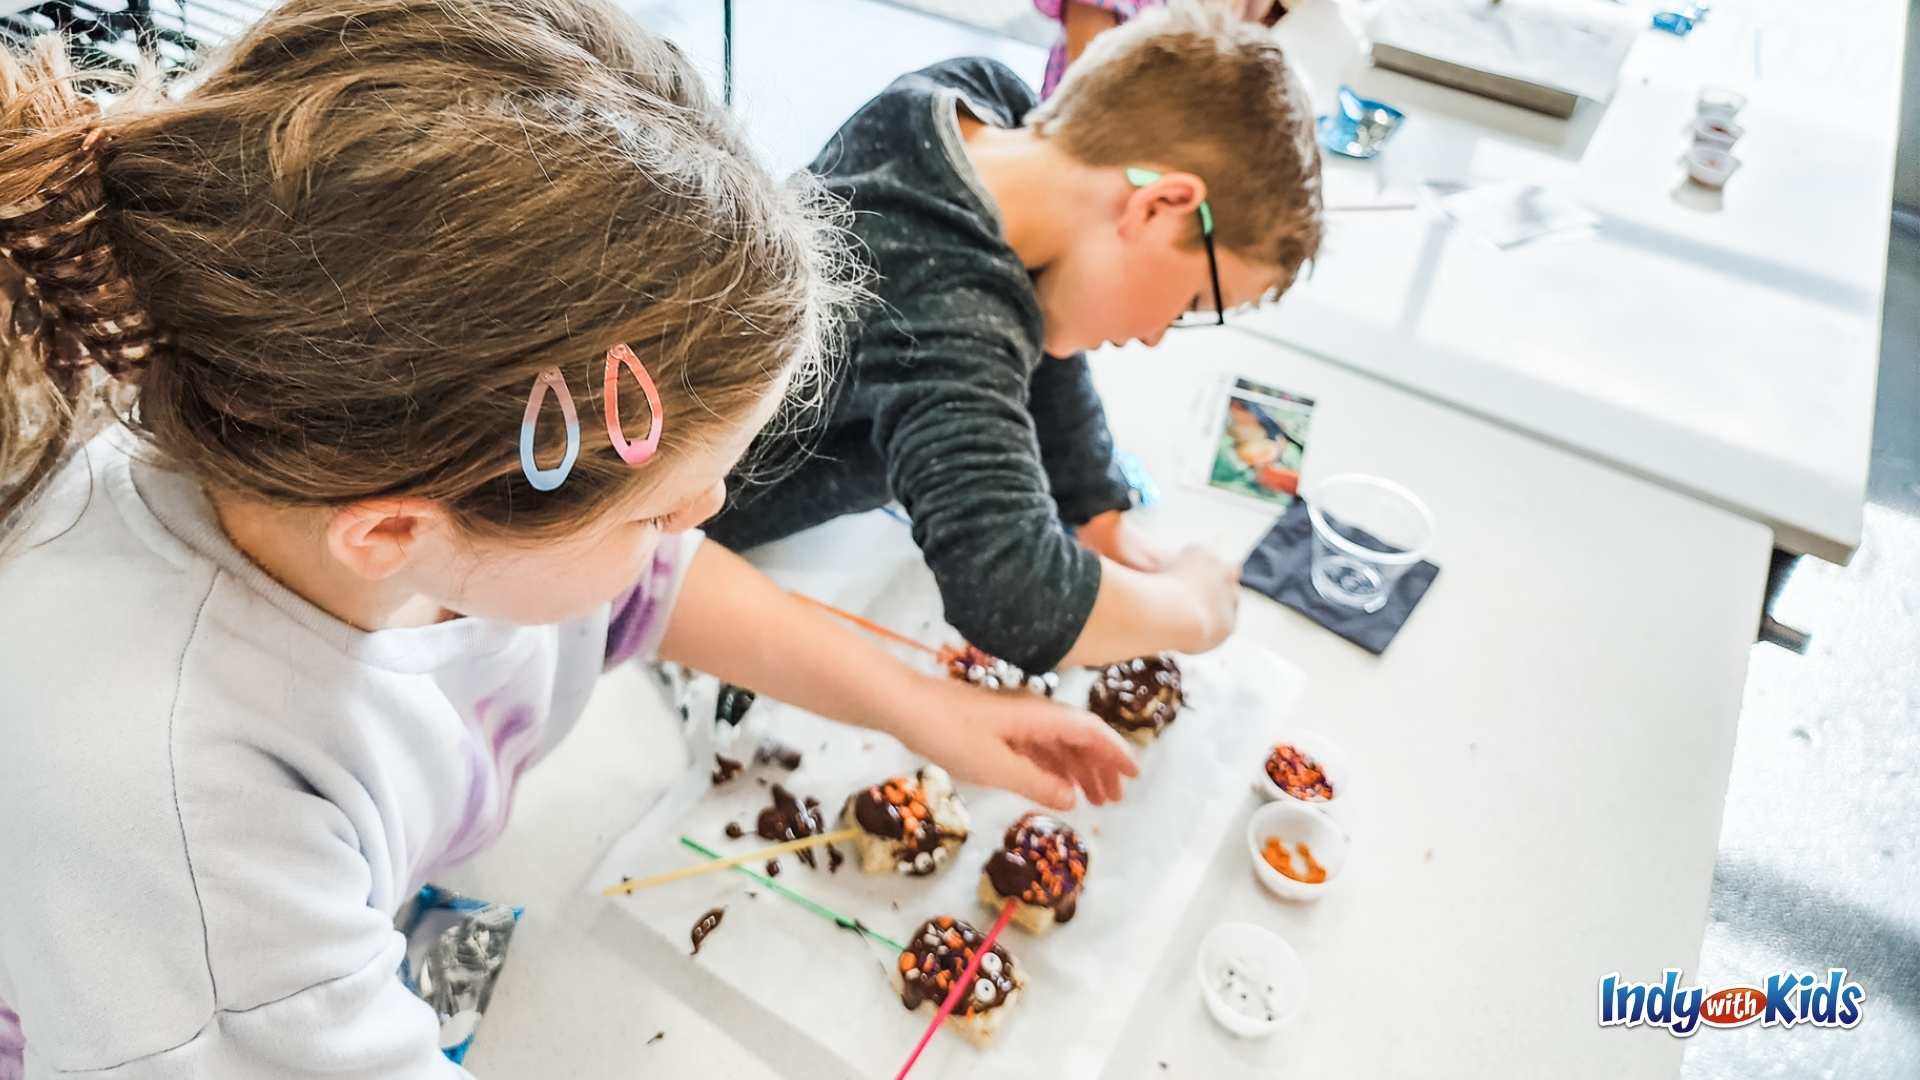 Kids Cooking Classes Near Me: SoChatti offers a sweet, simple, fun chocolate making class for kids.